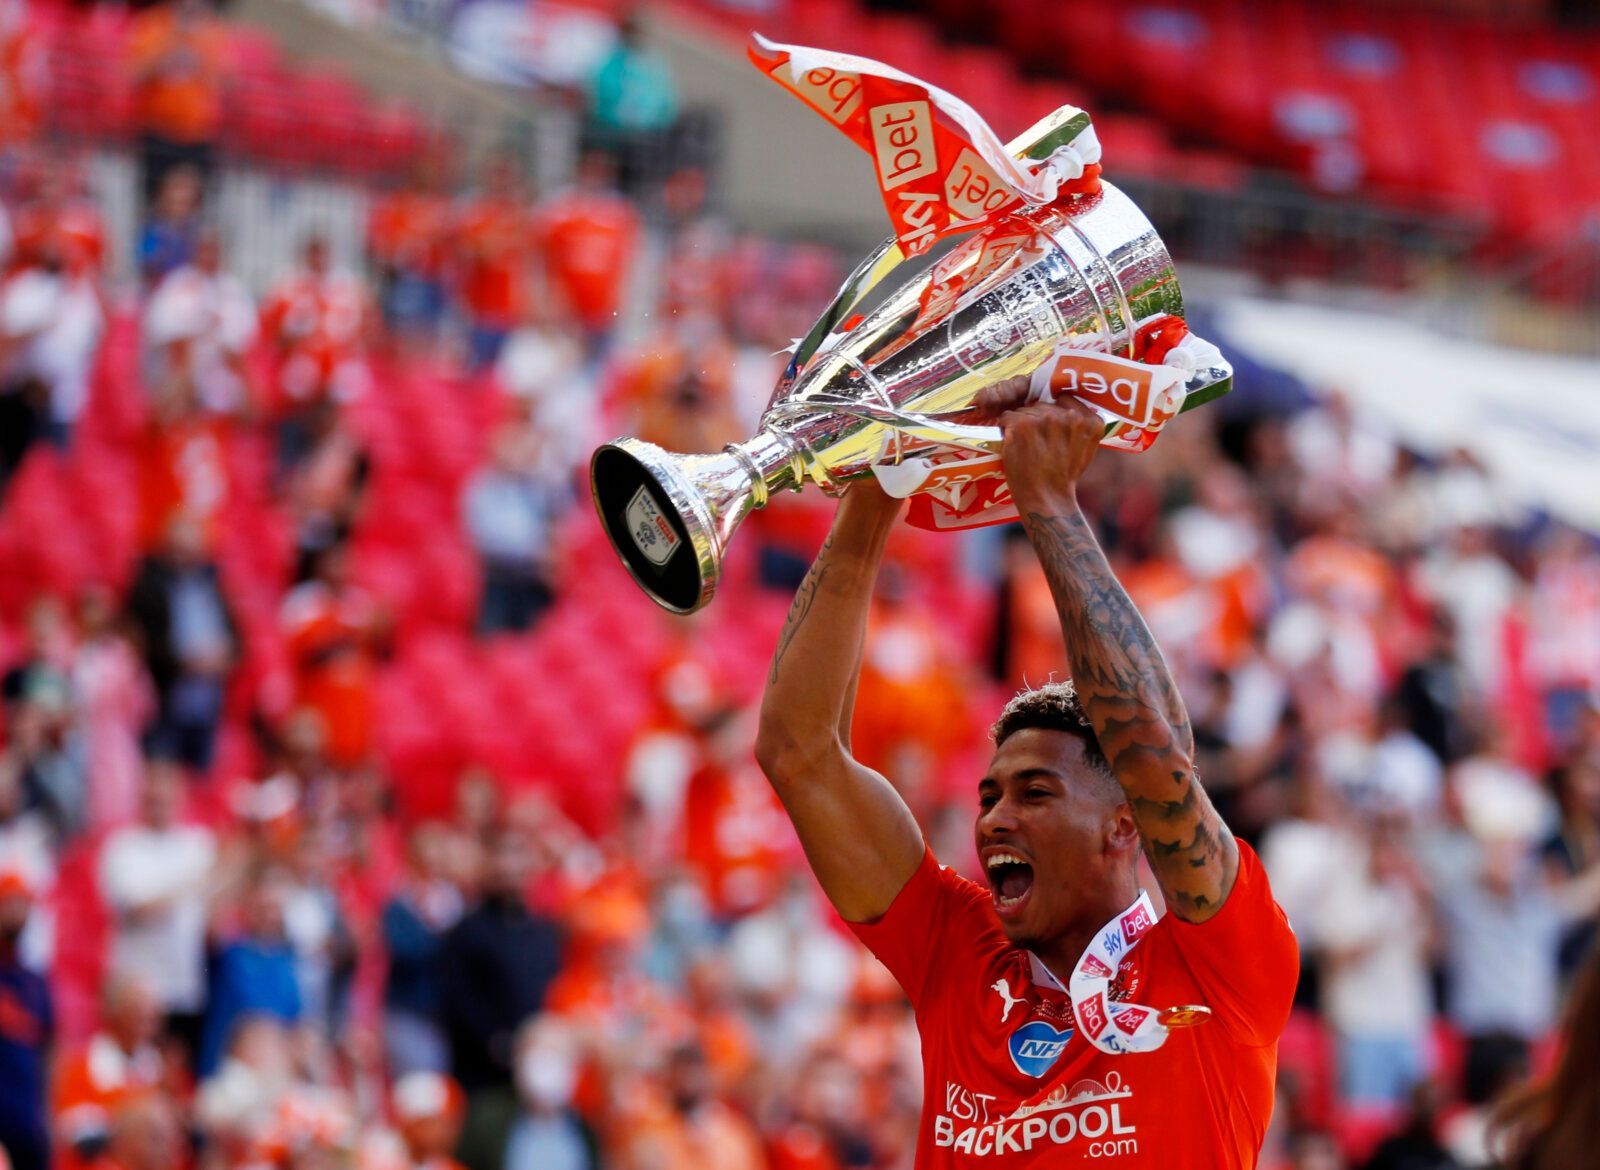 Soccer Football - League One Play-Off Final - Blackpool v Lincoln City - Wembley Stadium, London, Britain - May 30, 2021  Blackpool's Jordan Gabriel celebrates with the trophy after winning the League One Play-Off Final Action Images/Lee Smith EDITORIAL USE ONLY. No use with unauthorized audio, video, data, fixture lists, club/league logos or 'live' services. Online in-match use limited to 75 images, no video emulation. No use in betting, games or single club /league/player publications.  Please